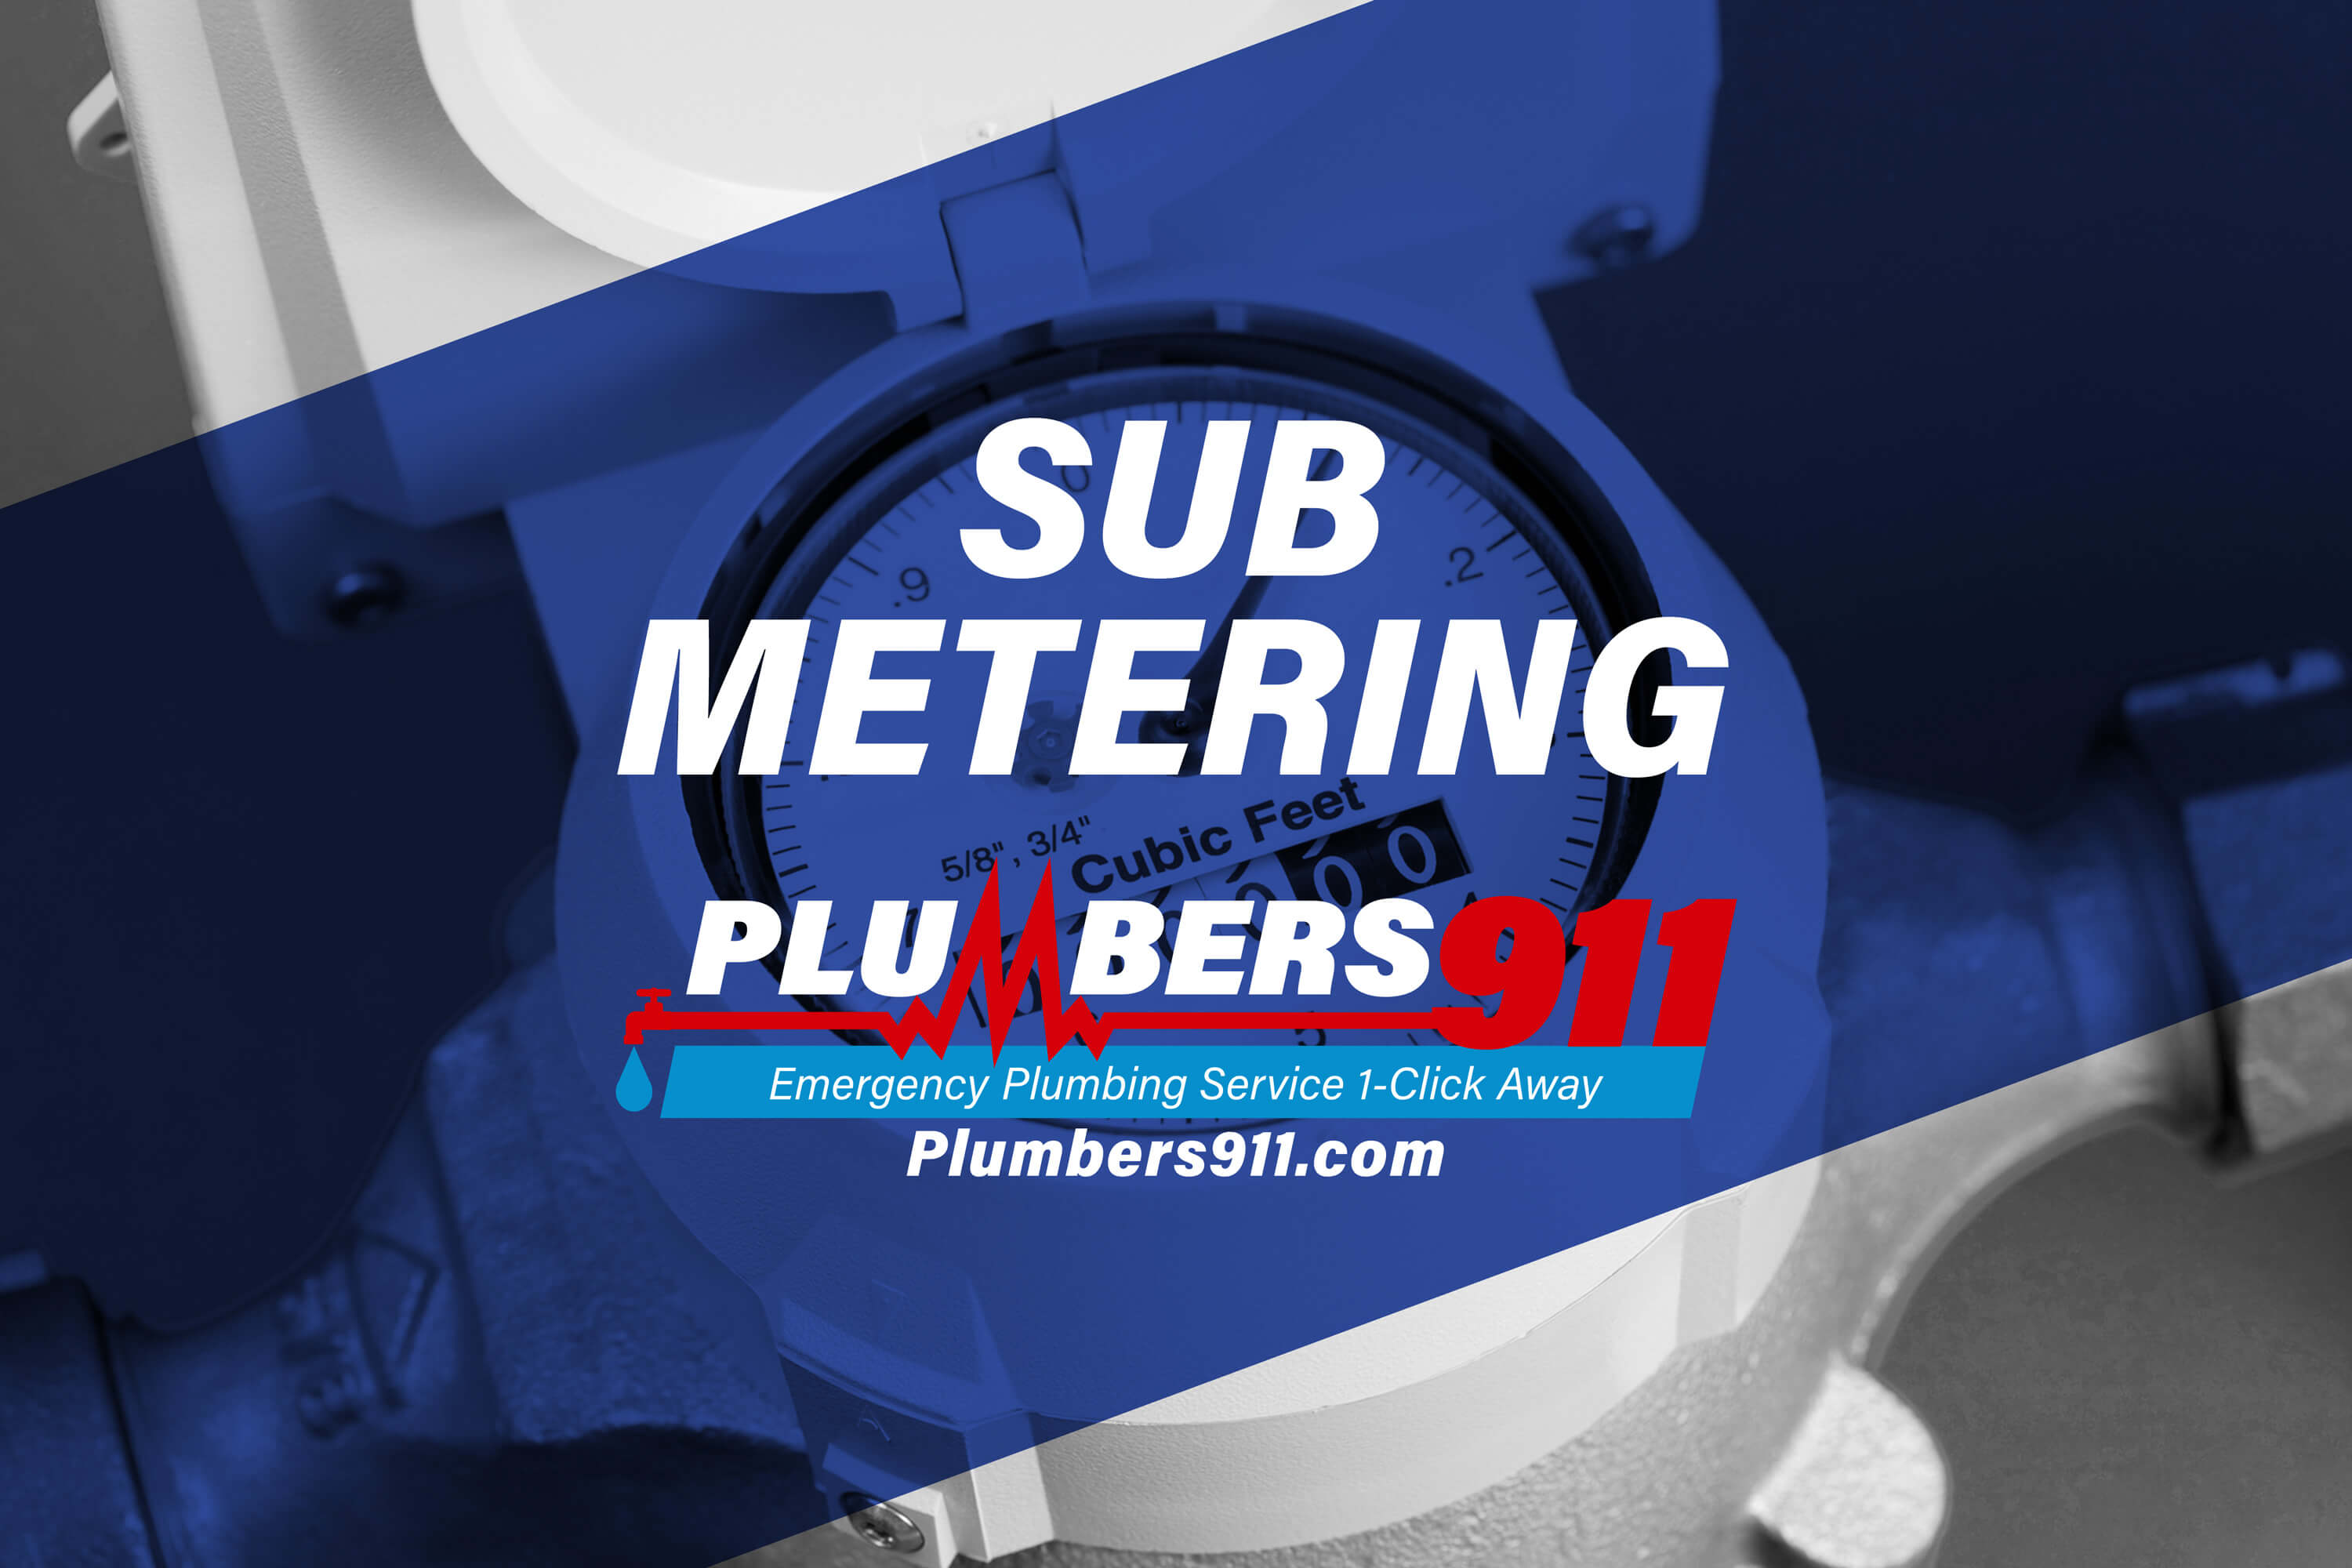 Plumbers 911 - Additional Plumbing Services - Sub Metering